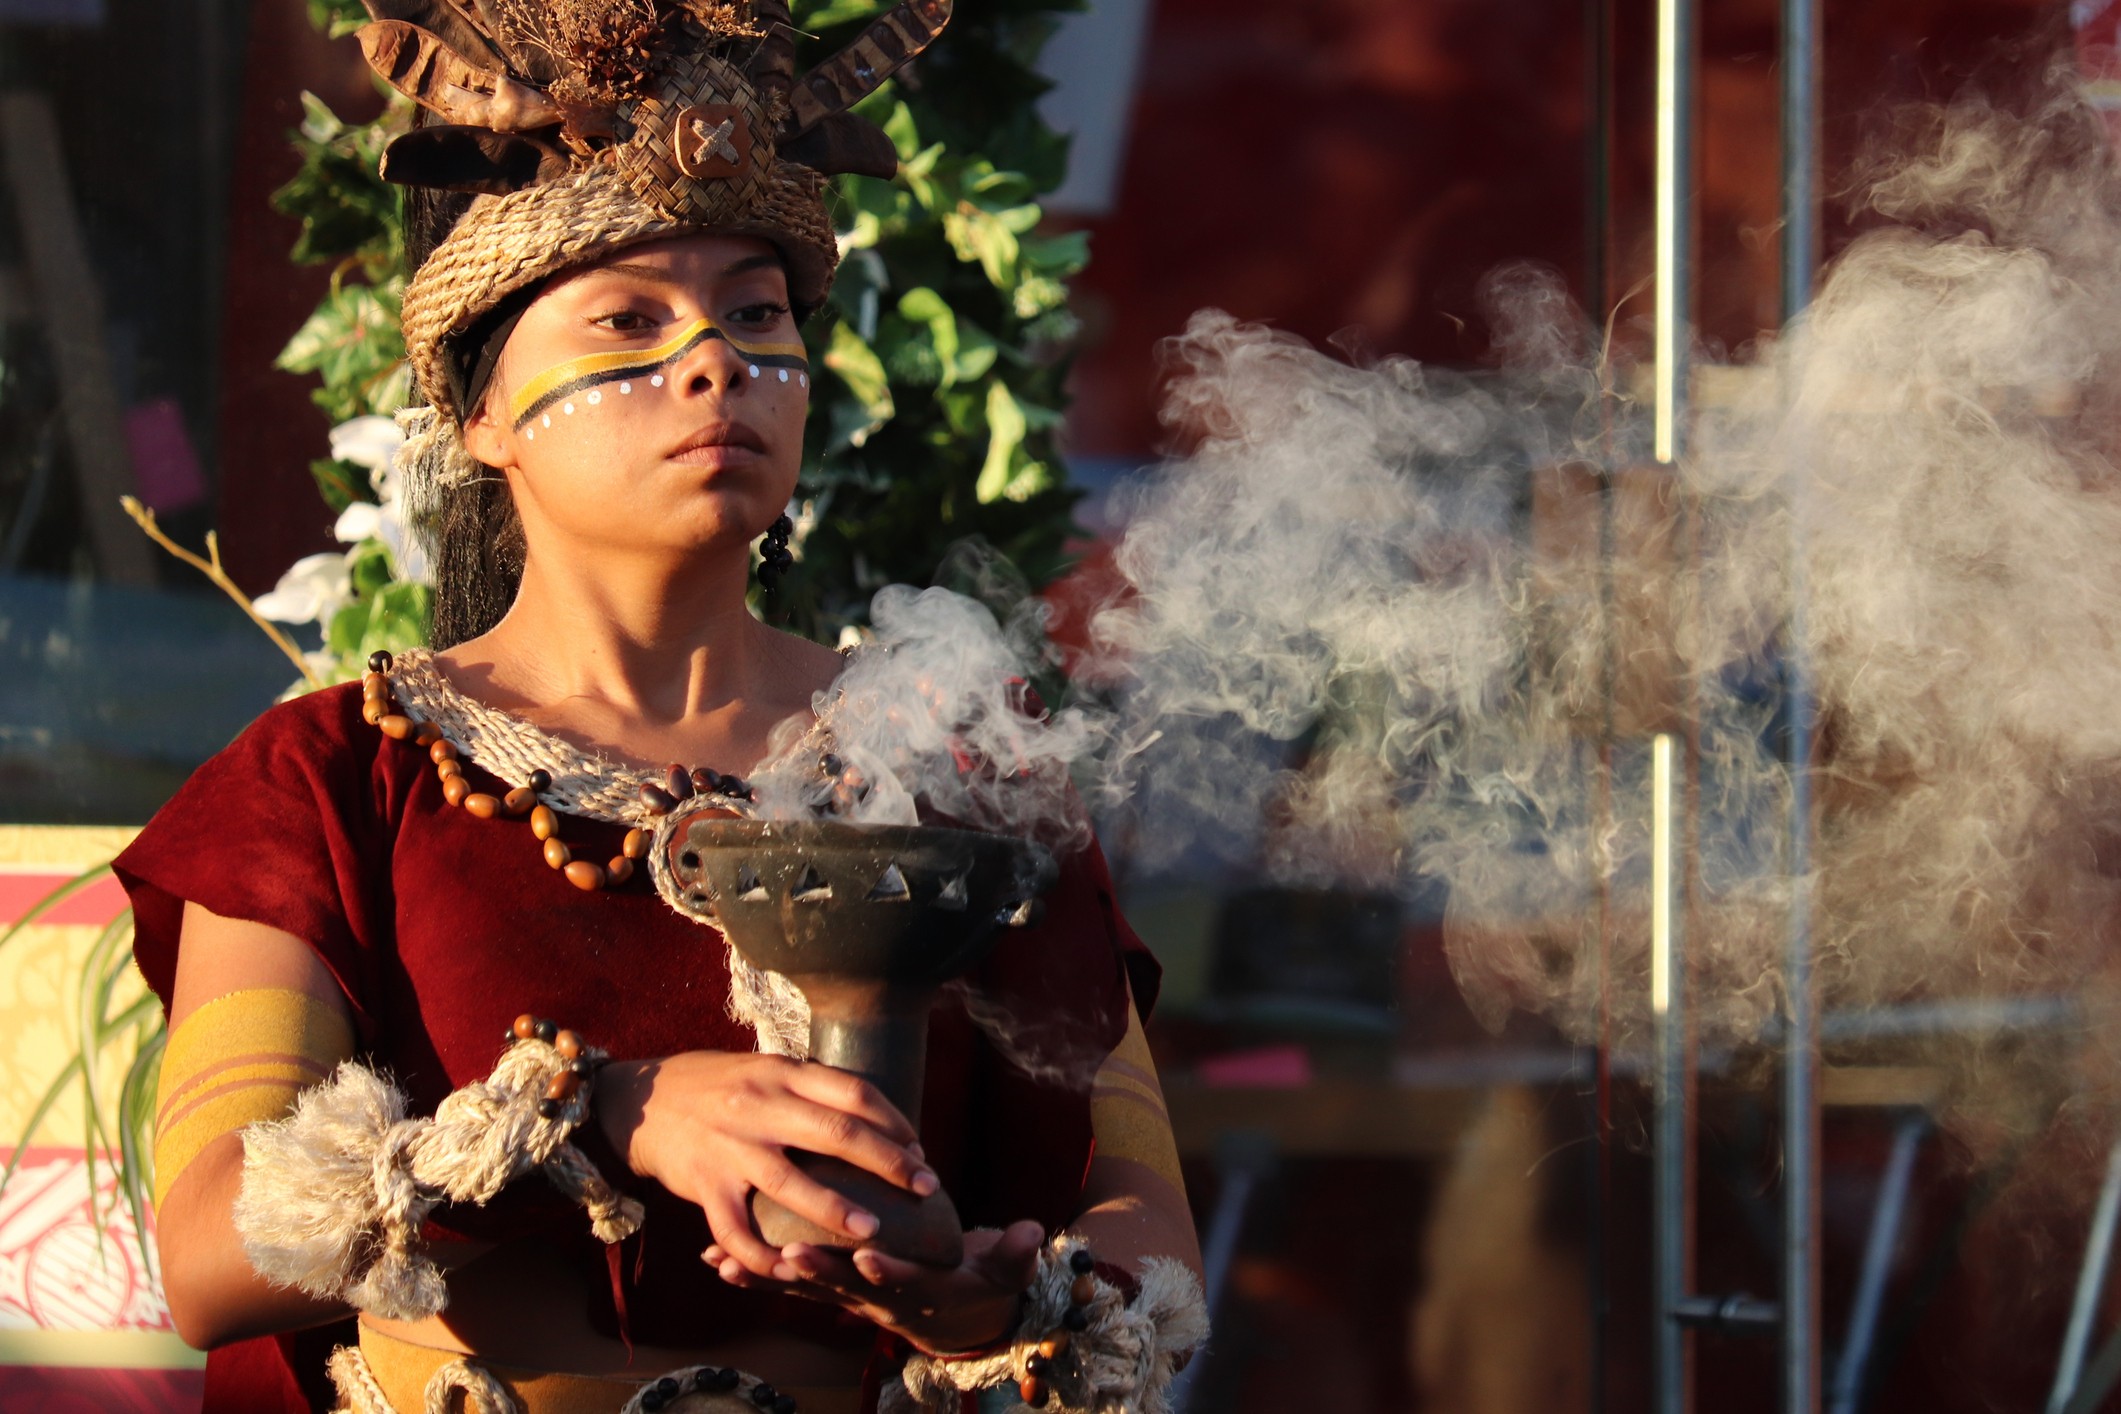 Mayan Priestess performs an ancient ritual of fire in Manezh square, Moscow, during the historical festival of Times and Epochs.